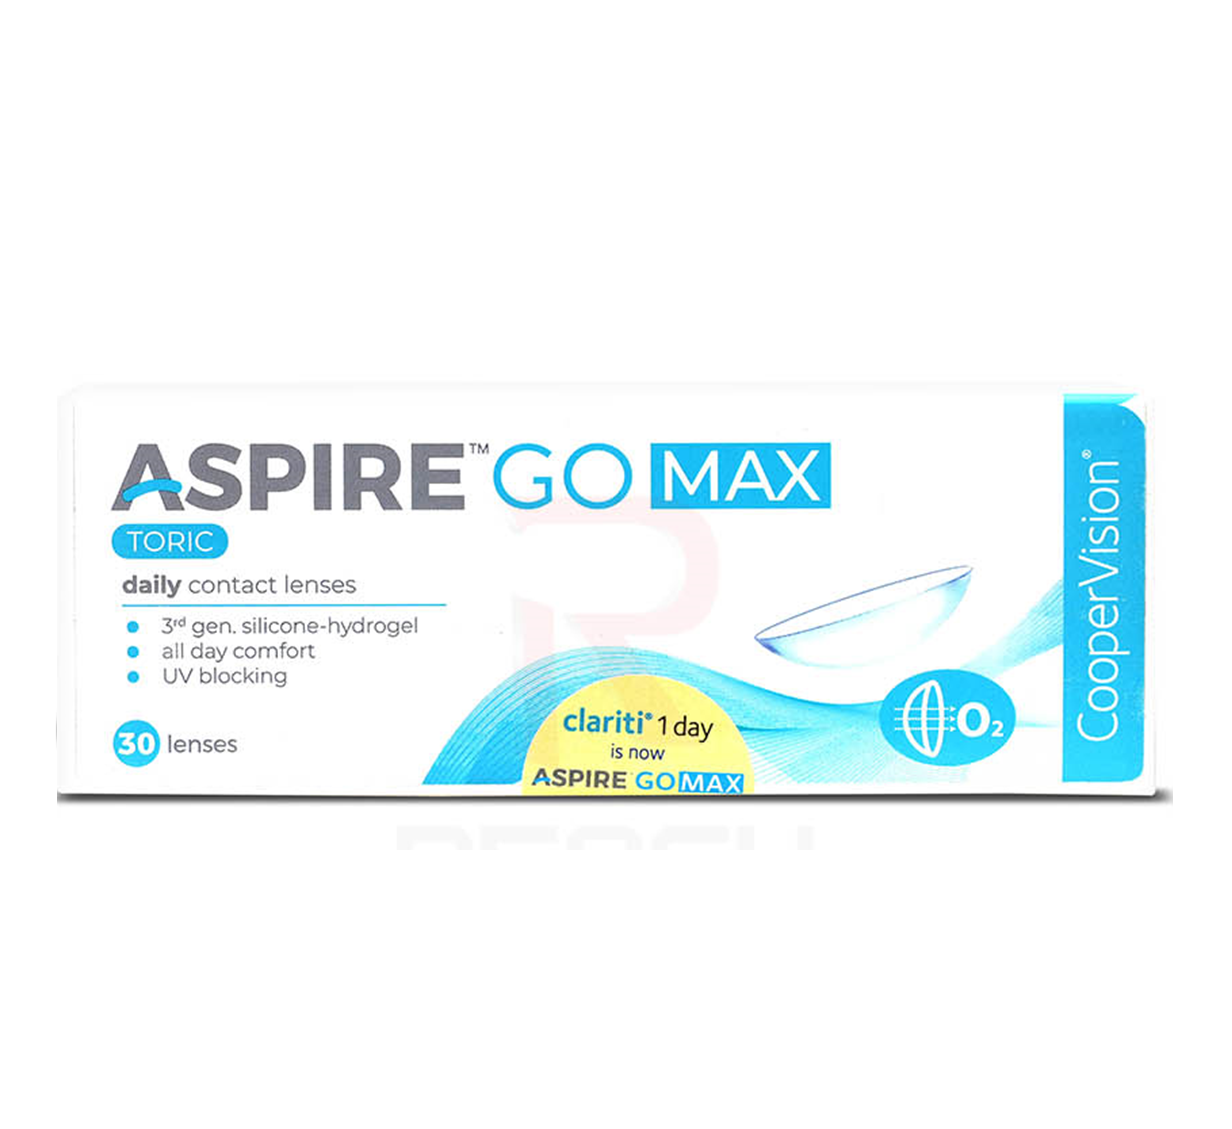 Aspire GO MAX Toric 1 day Daily Disposable Silicone Hydrogel lenses for ASTIGMATISM (30 lenses box)